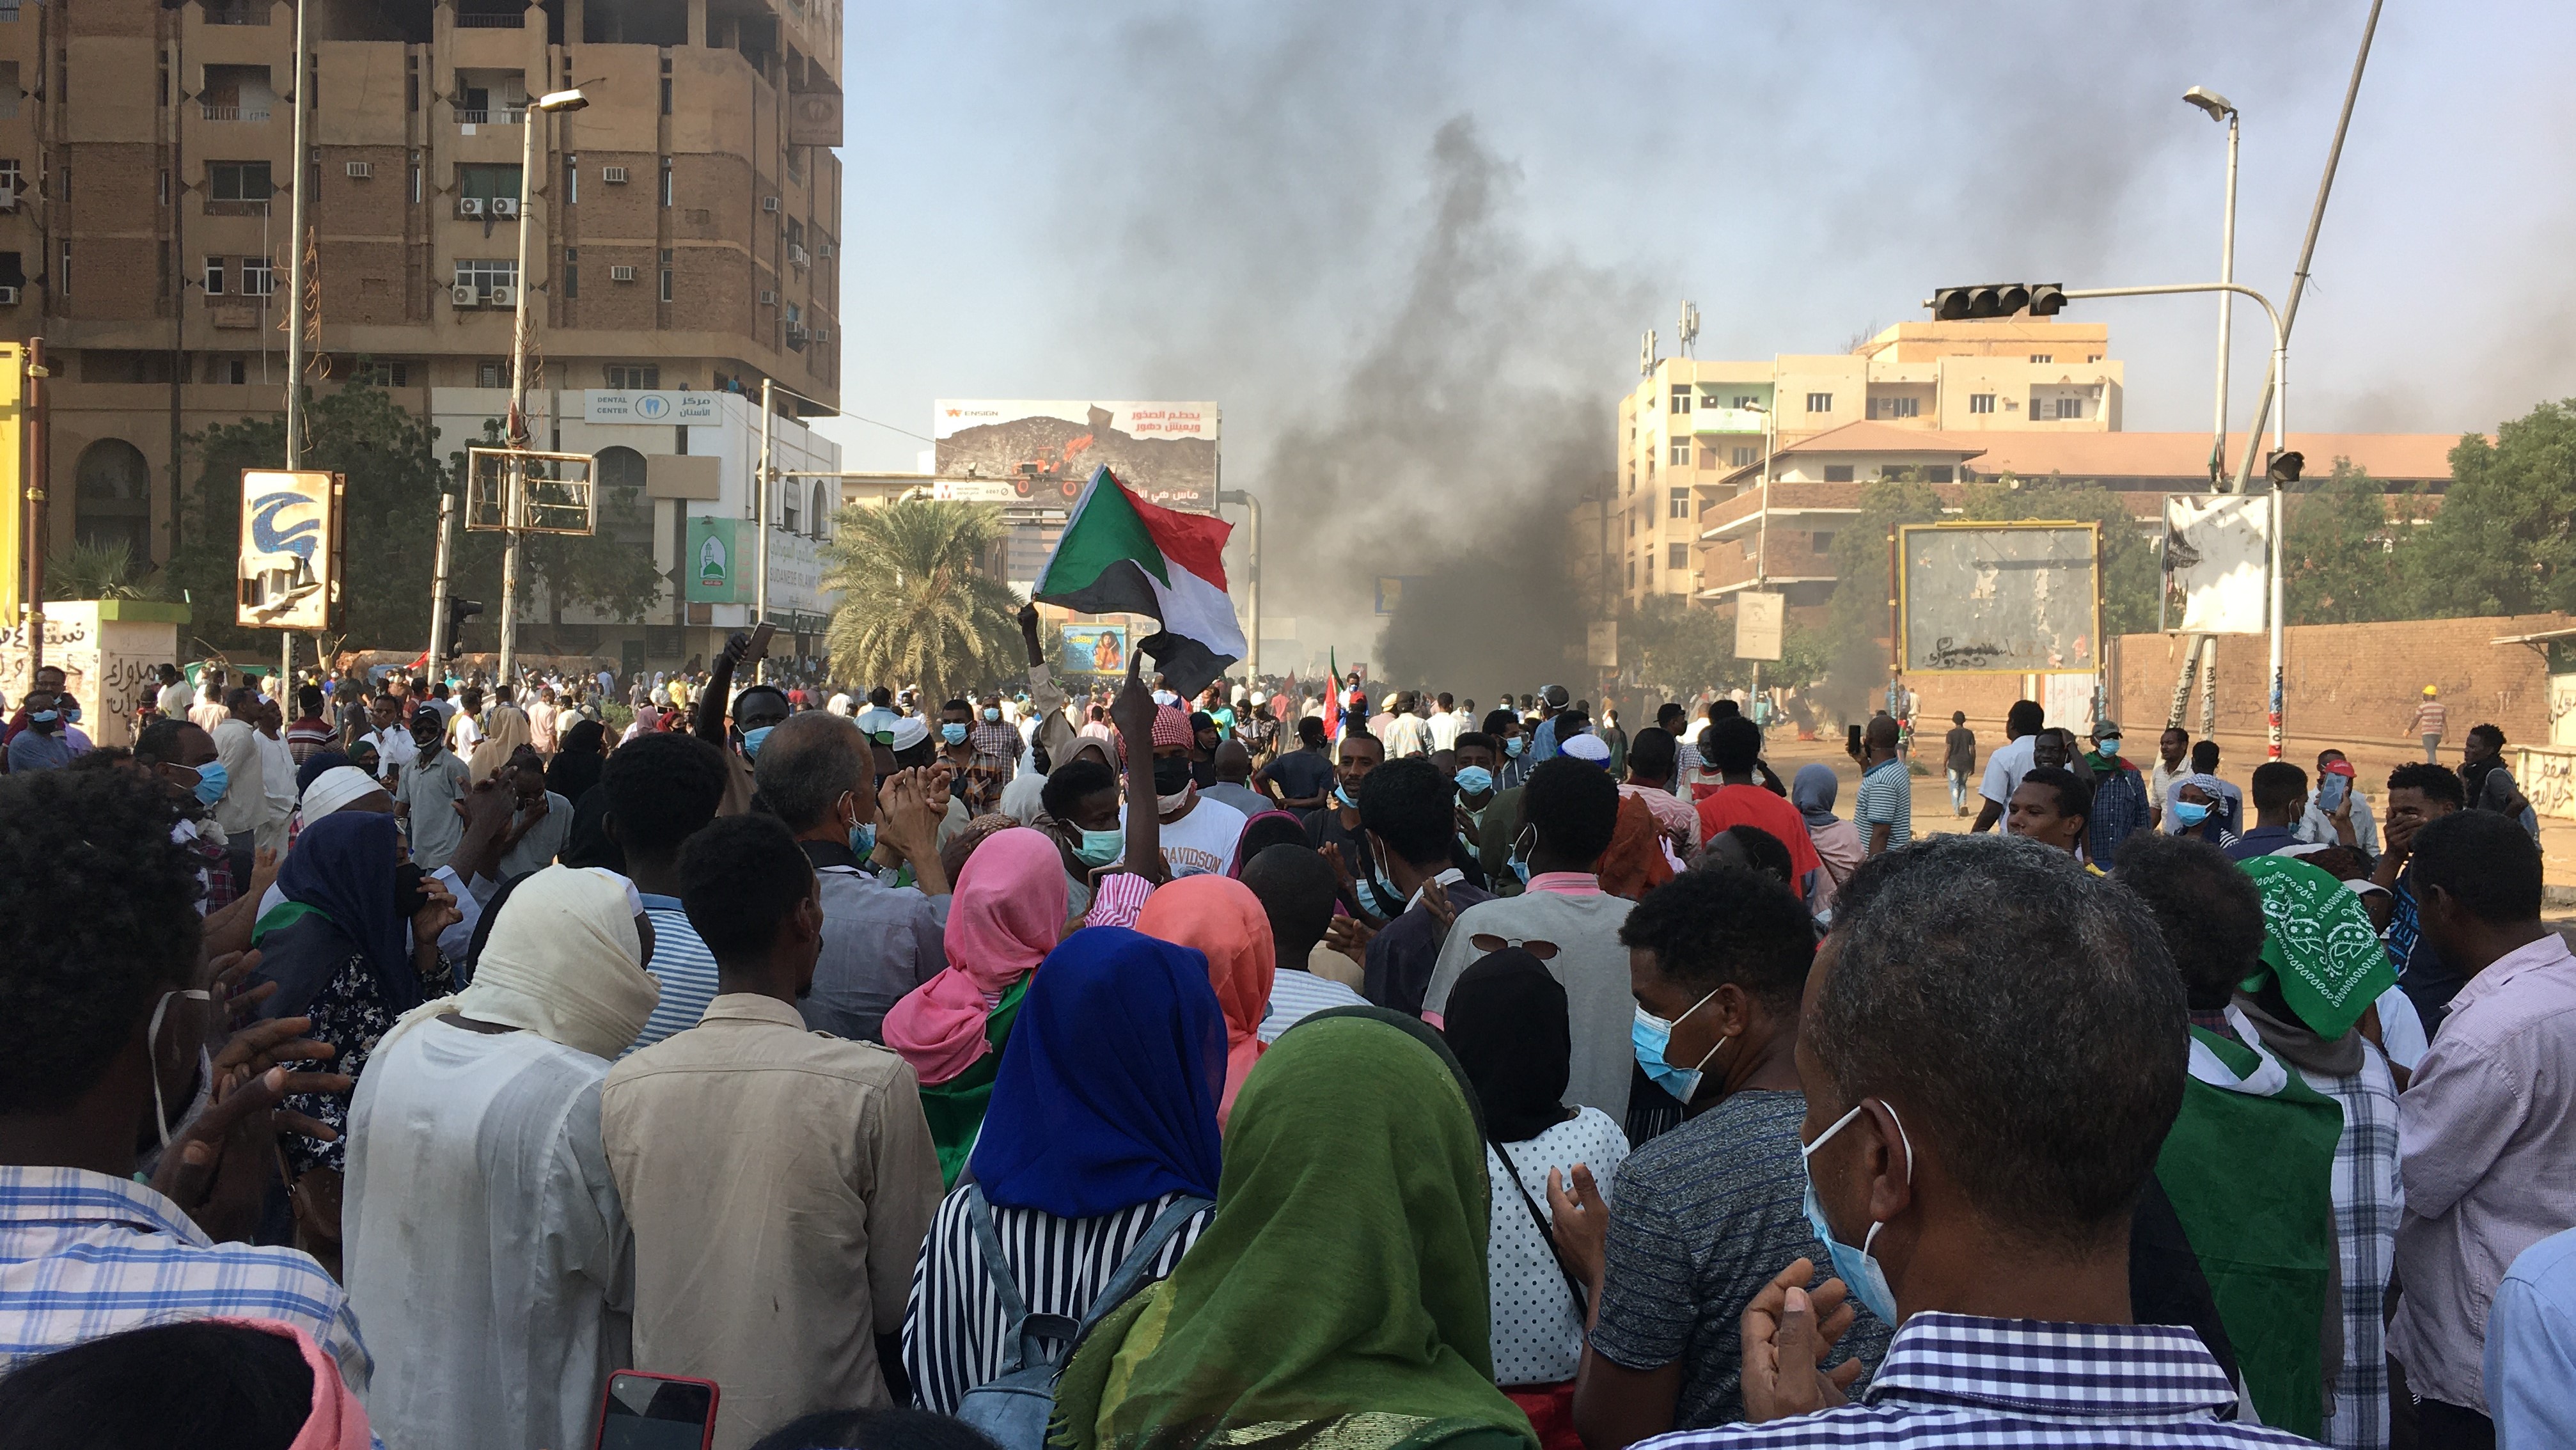 Protesters in Khartoum march on the presidential palace to demand civilian rule, January 2022 (photo: Eduard Cousin)